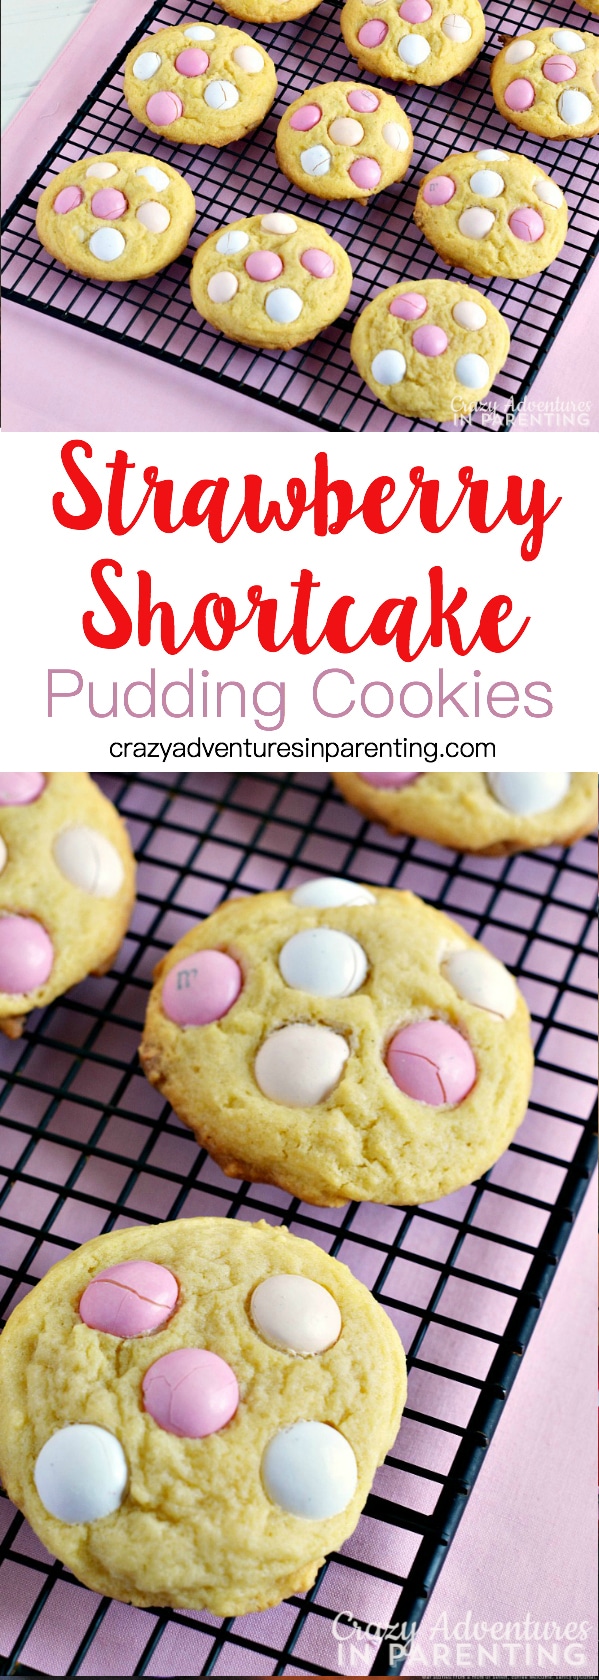 Strawberry Shortcake Pudding Cookies for Valentine's Day